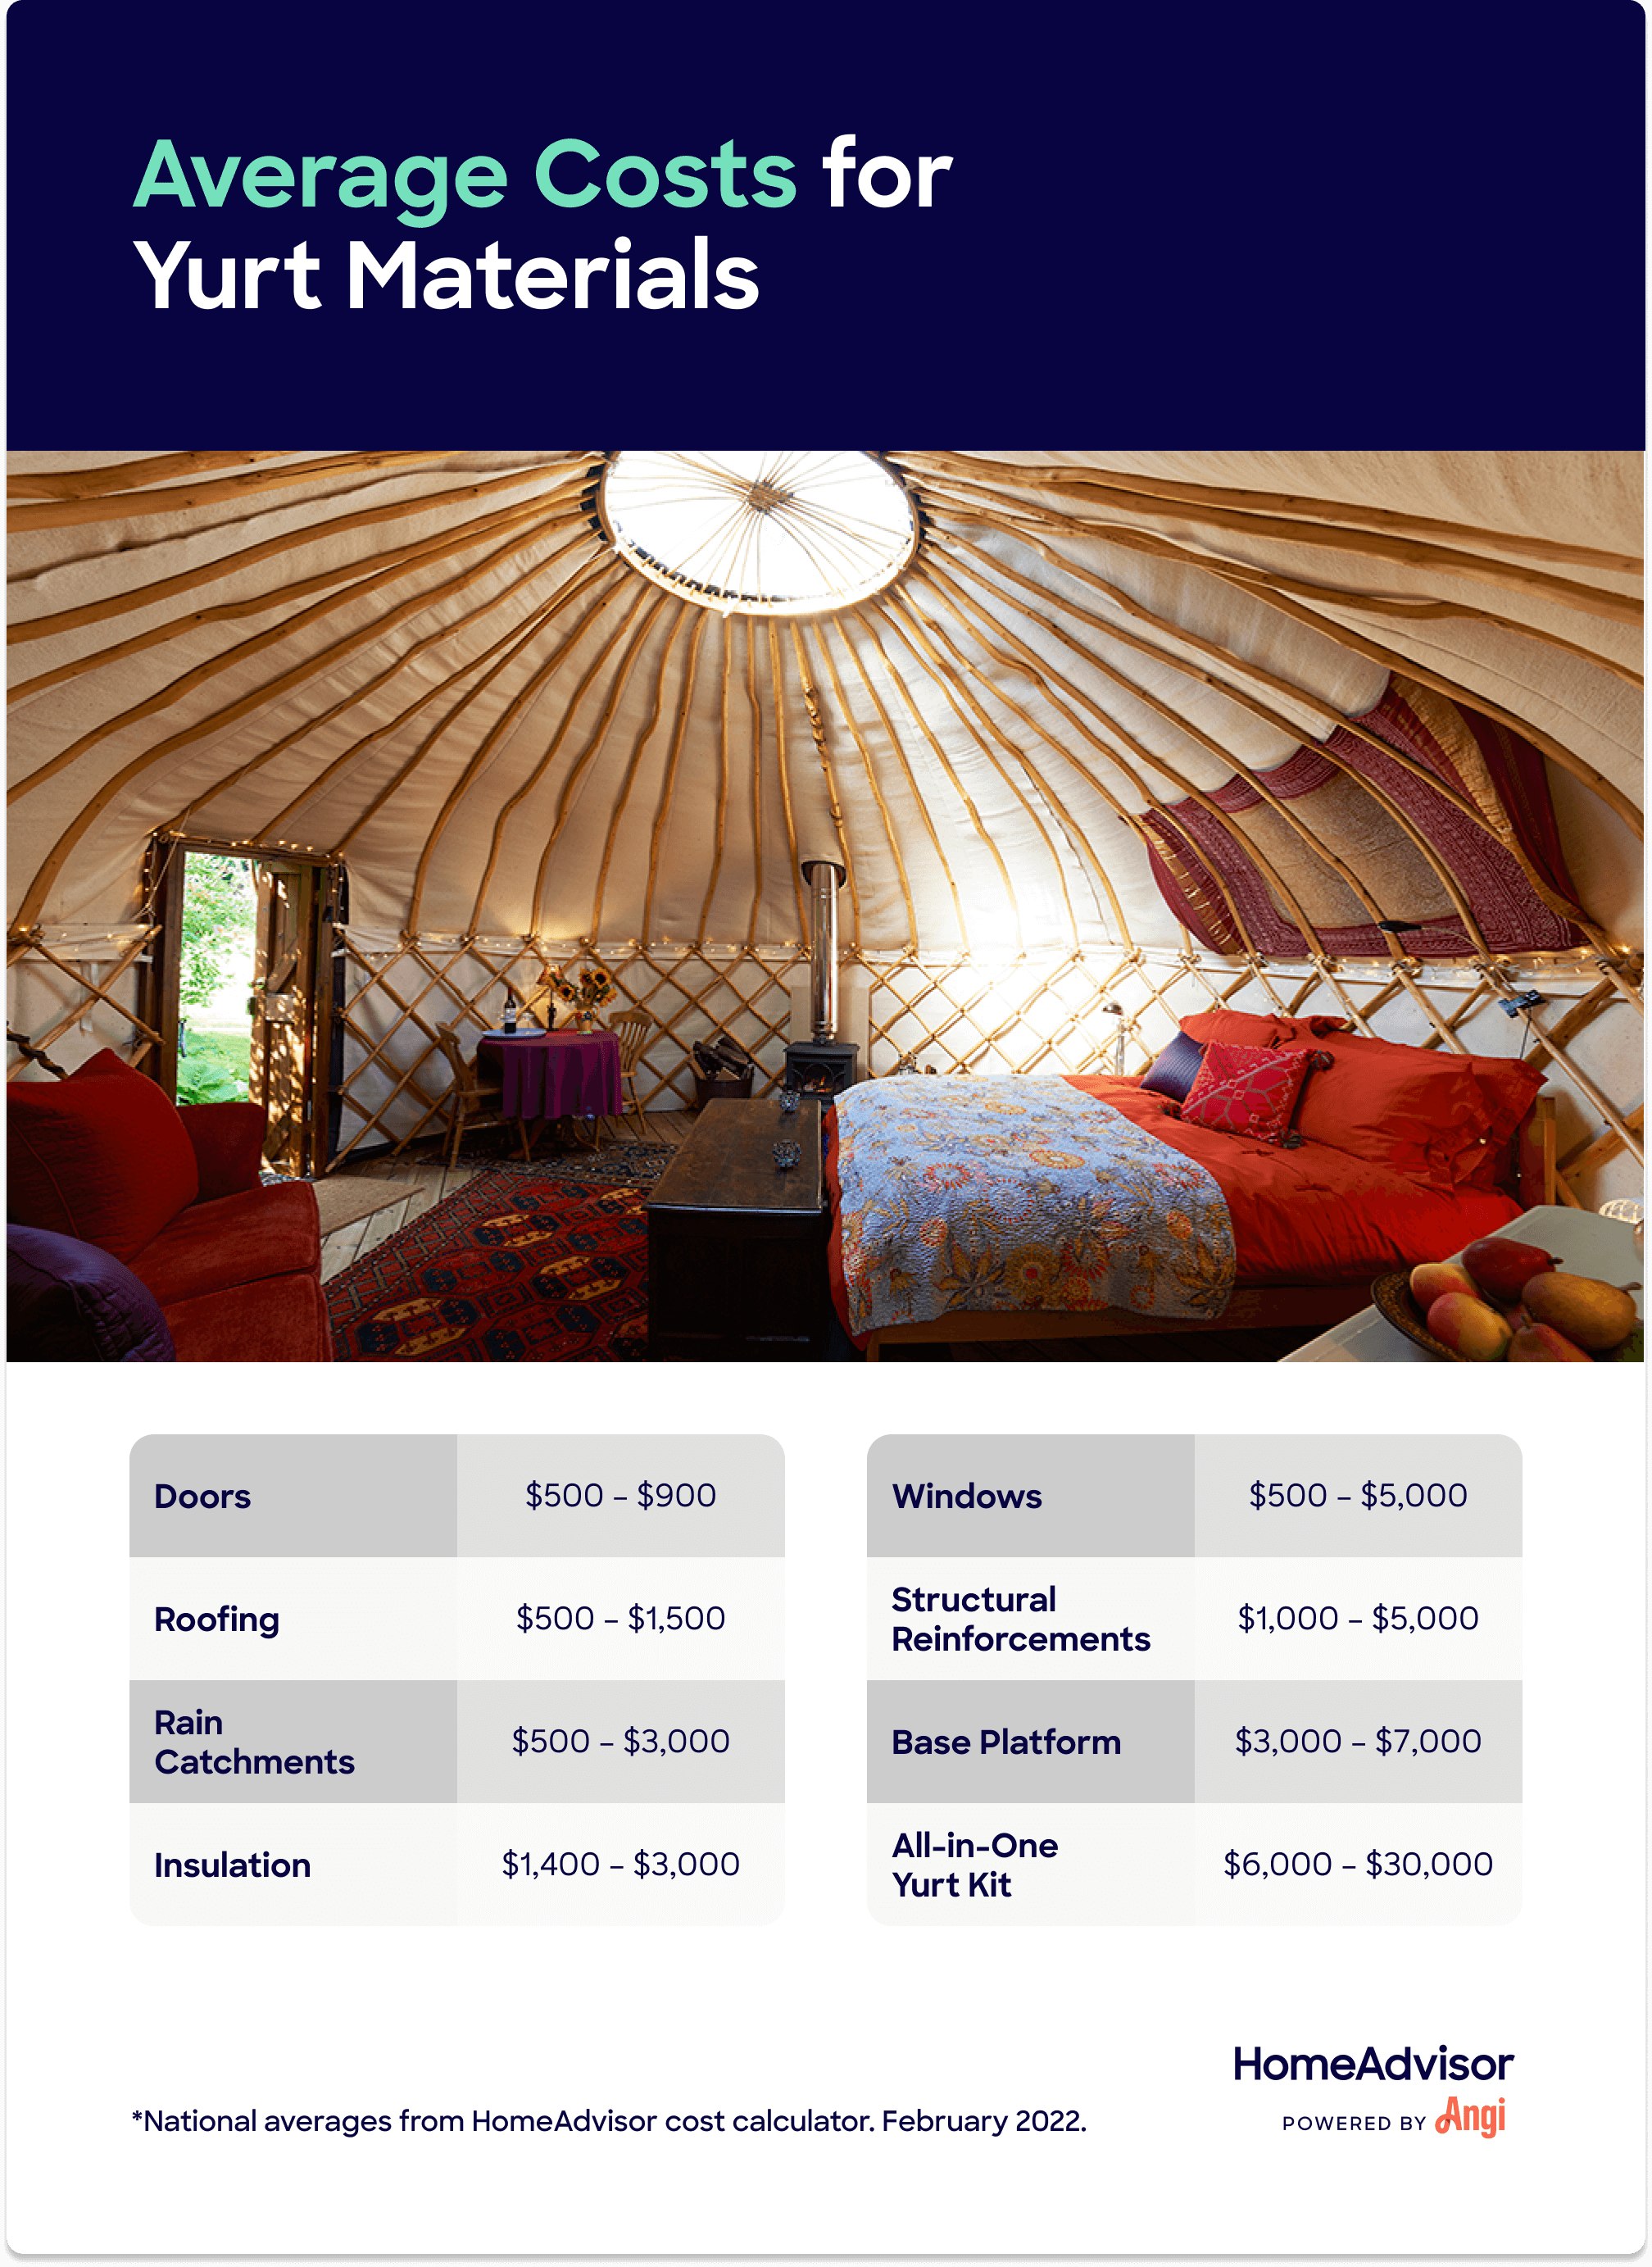 How Much Does it Cost to Build a Yurt?